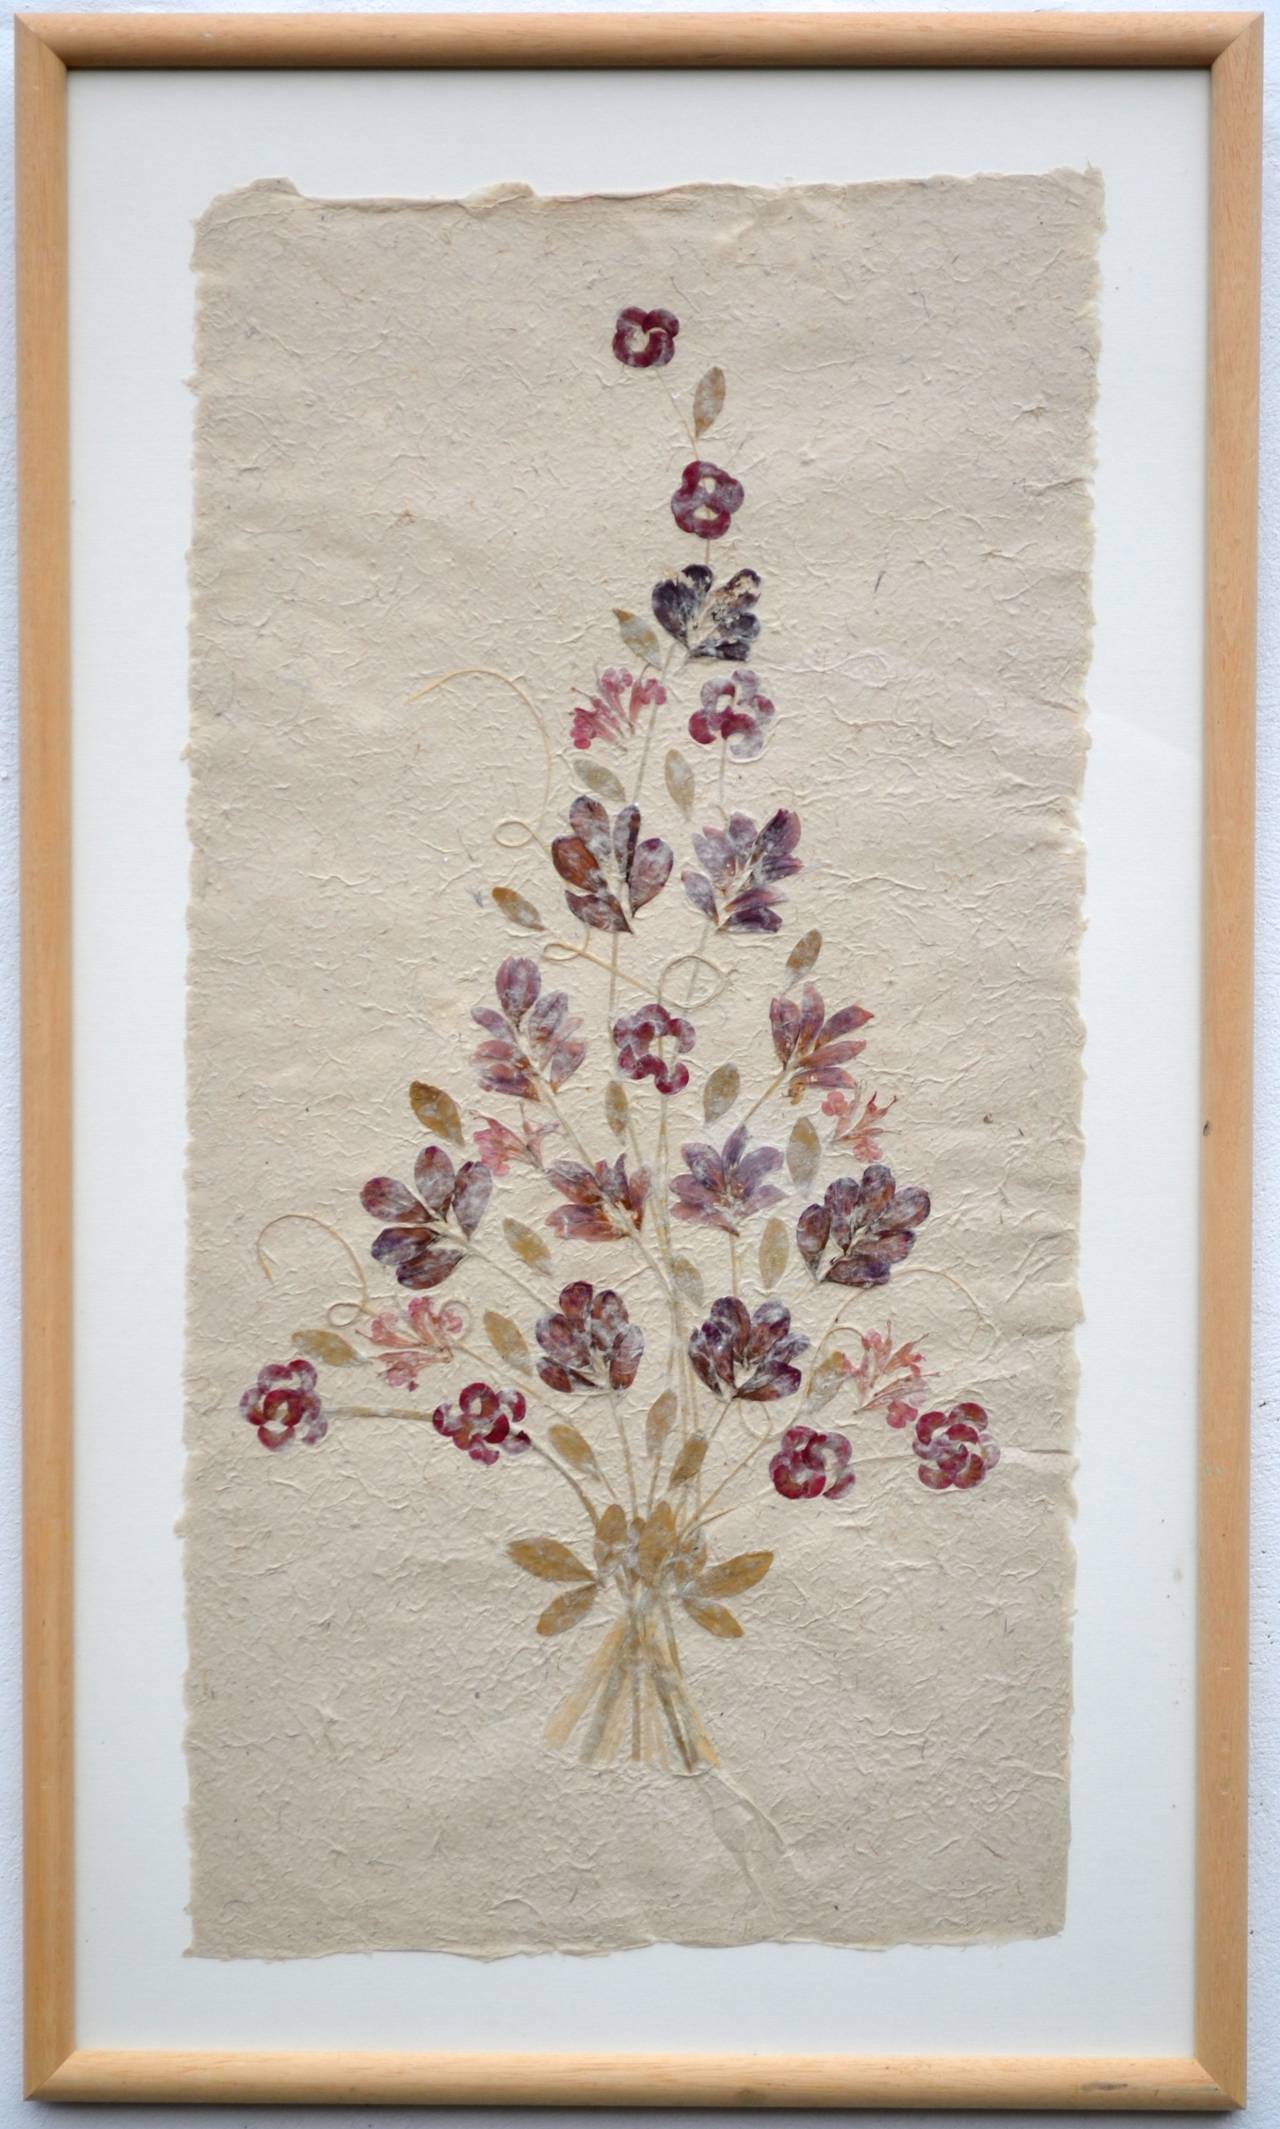 Madagascan Dried Flowers - Outsider Art Art by Unknown